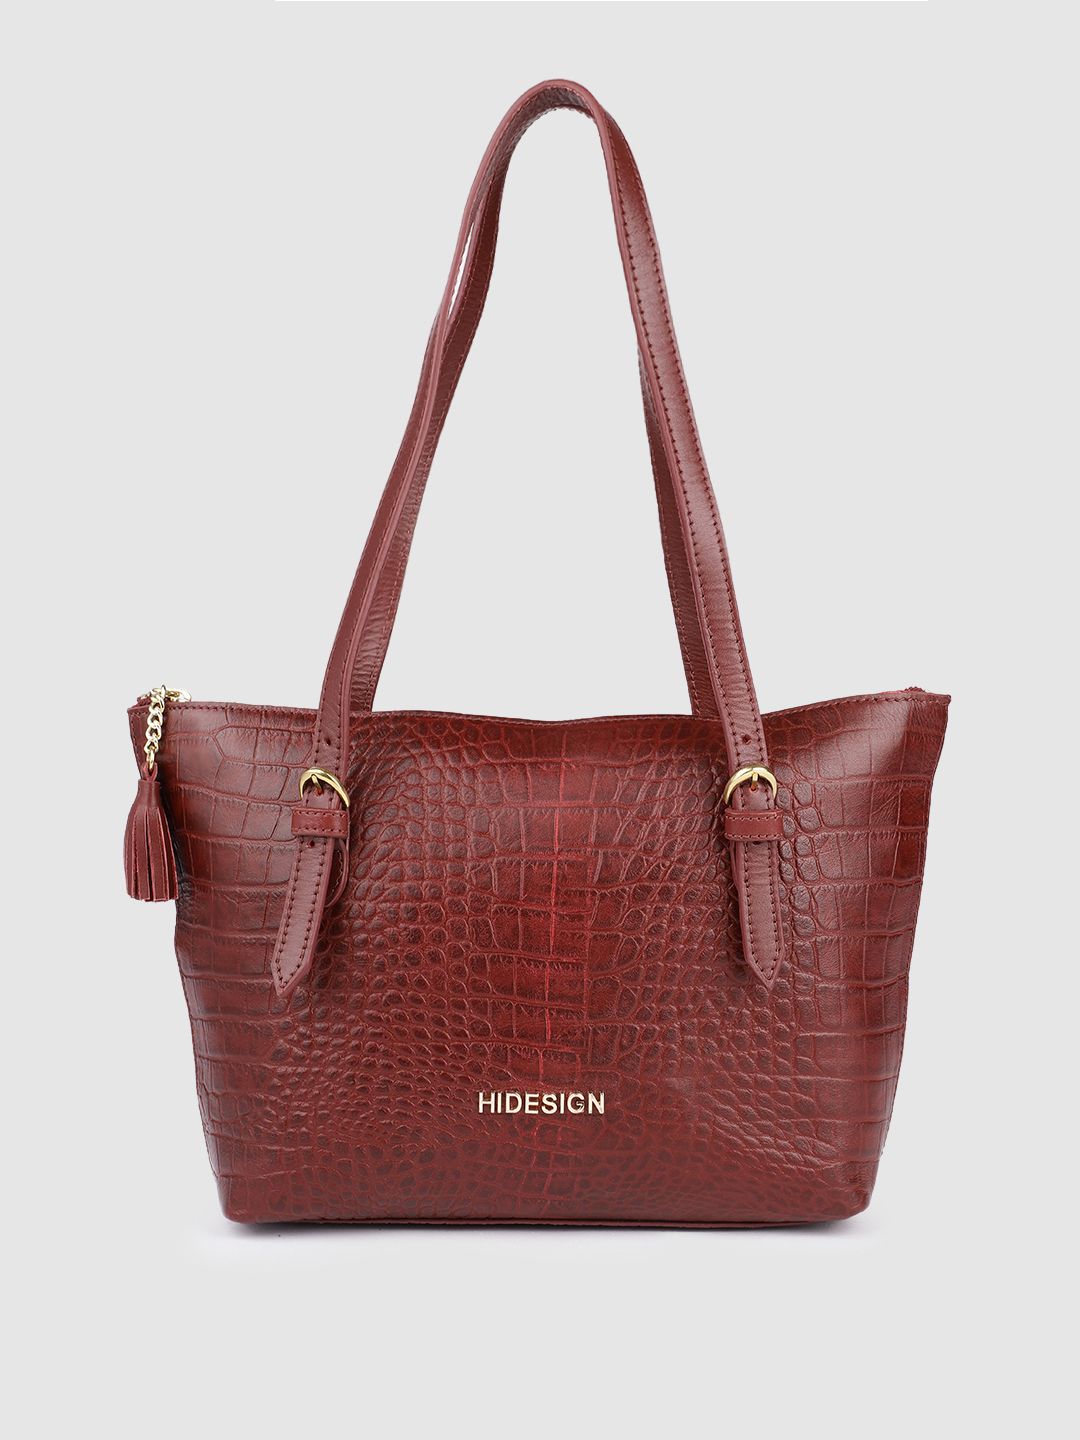 Hidesign Red Textured Leather Structured Shoulder Bag Price in India